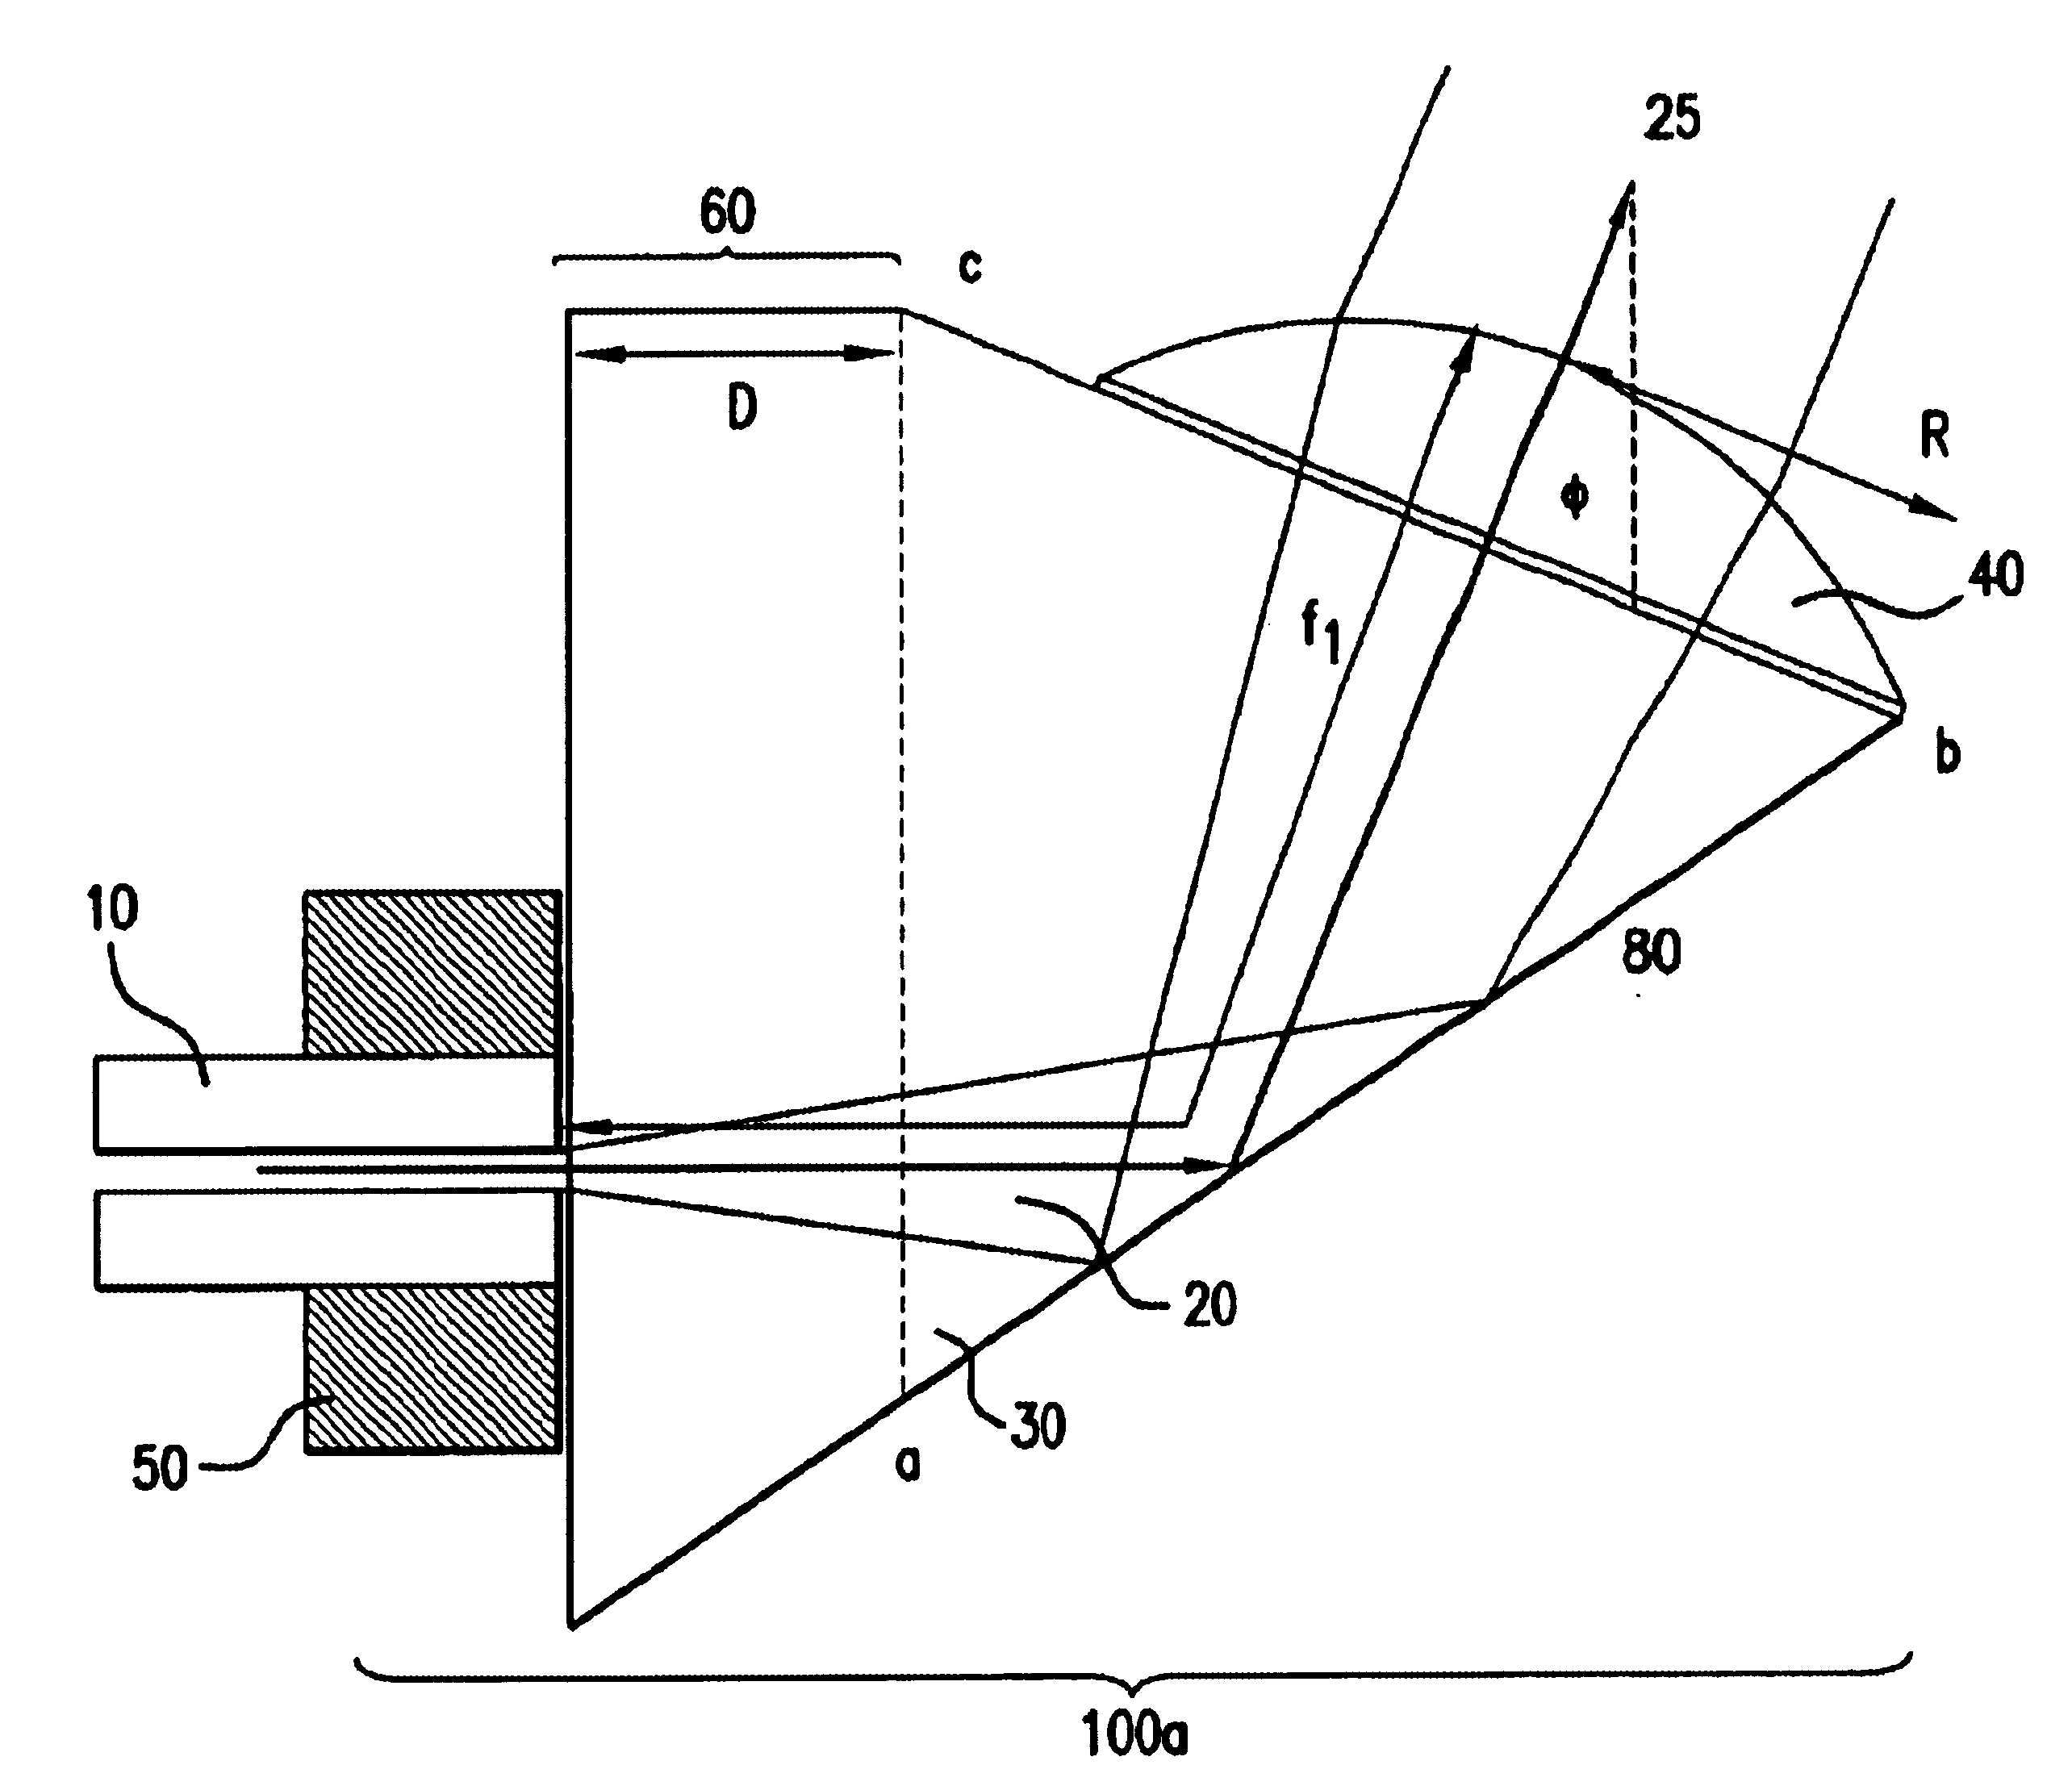 System and method for collimating and redirecting beams in a fiber optic system